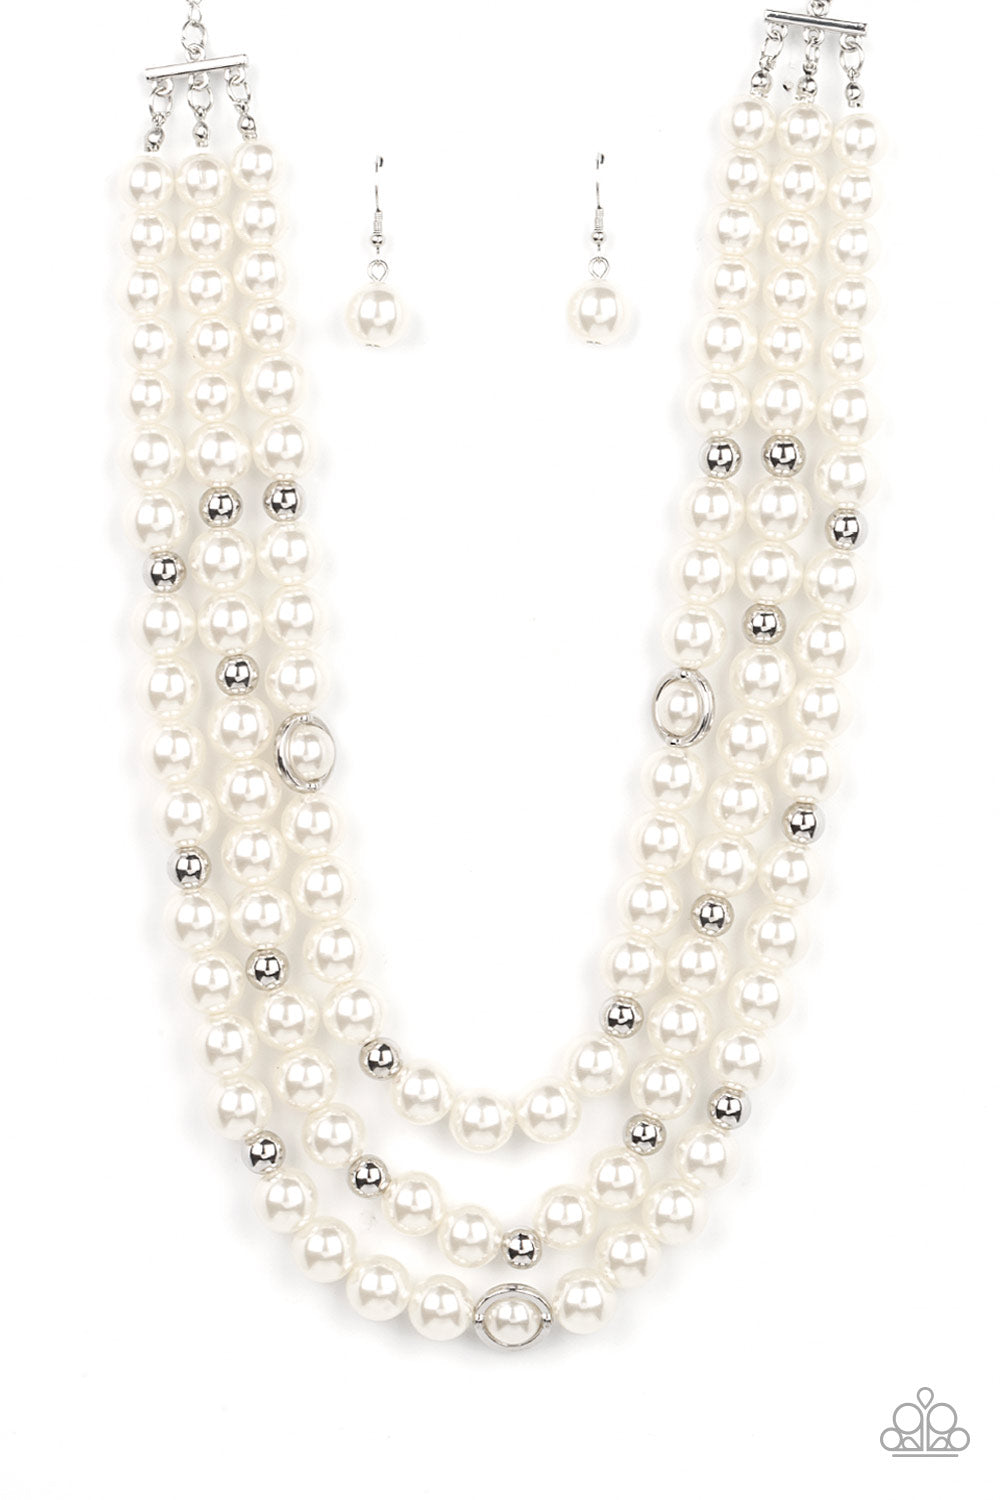 five-dollar-jewelry-needs-no-introduction-white-necklace-paparazzi-accessories